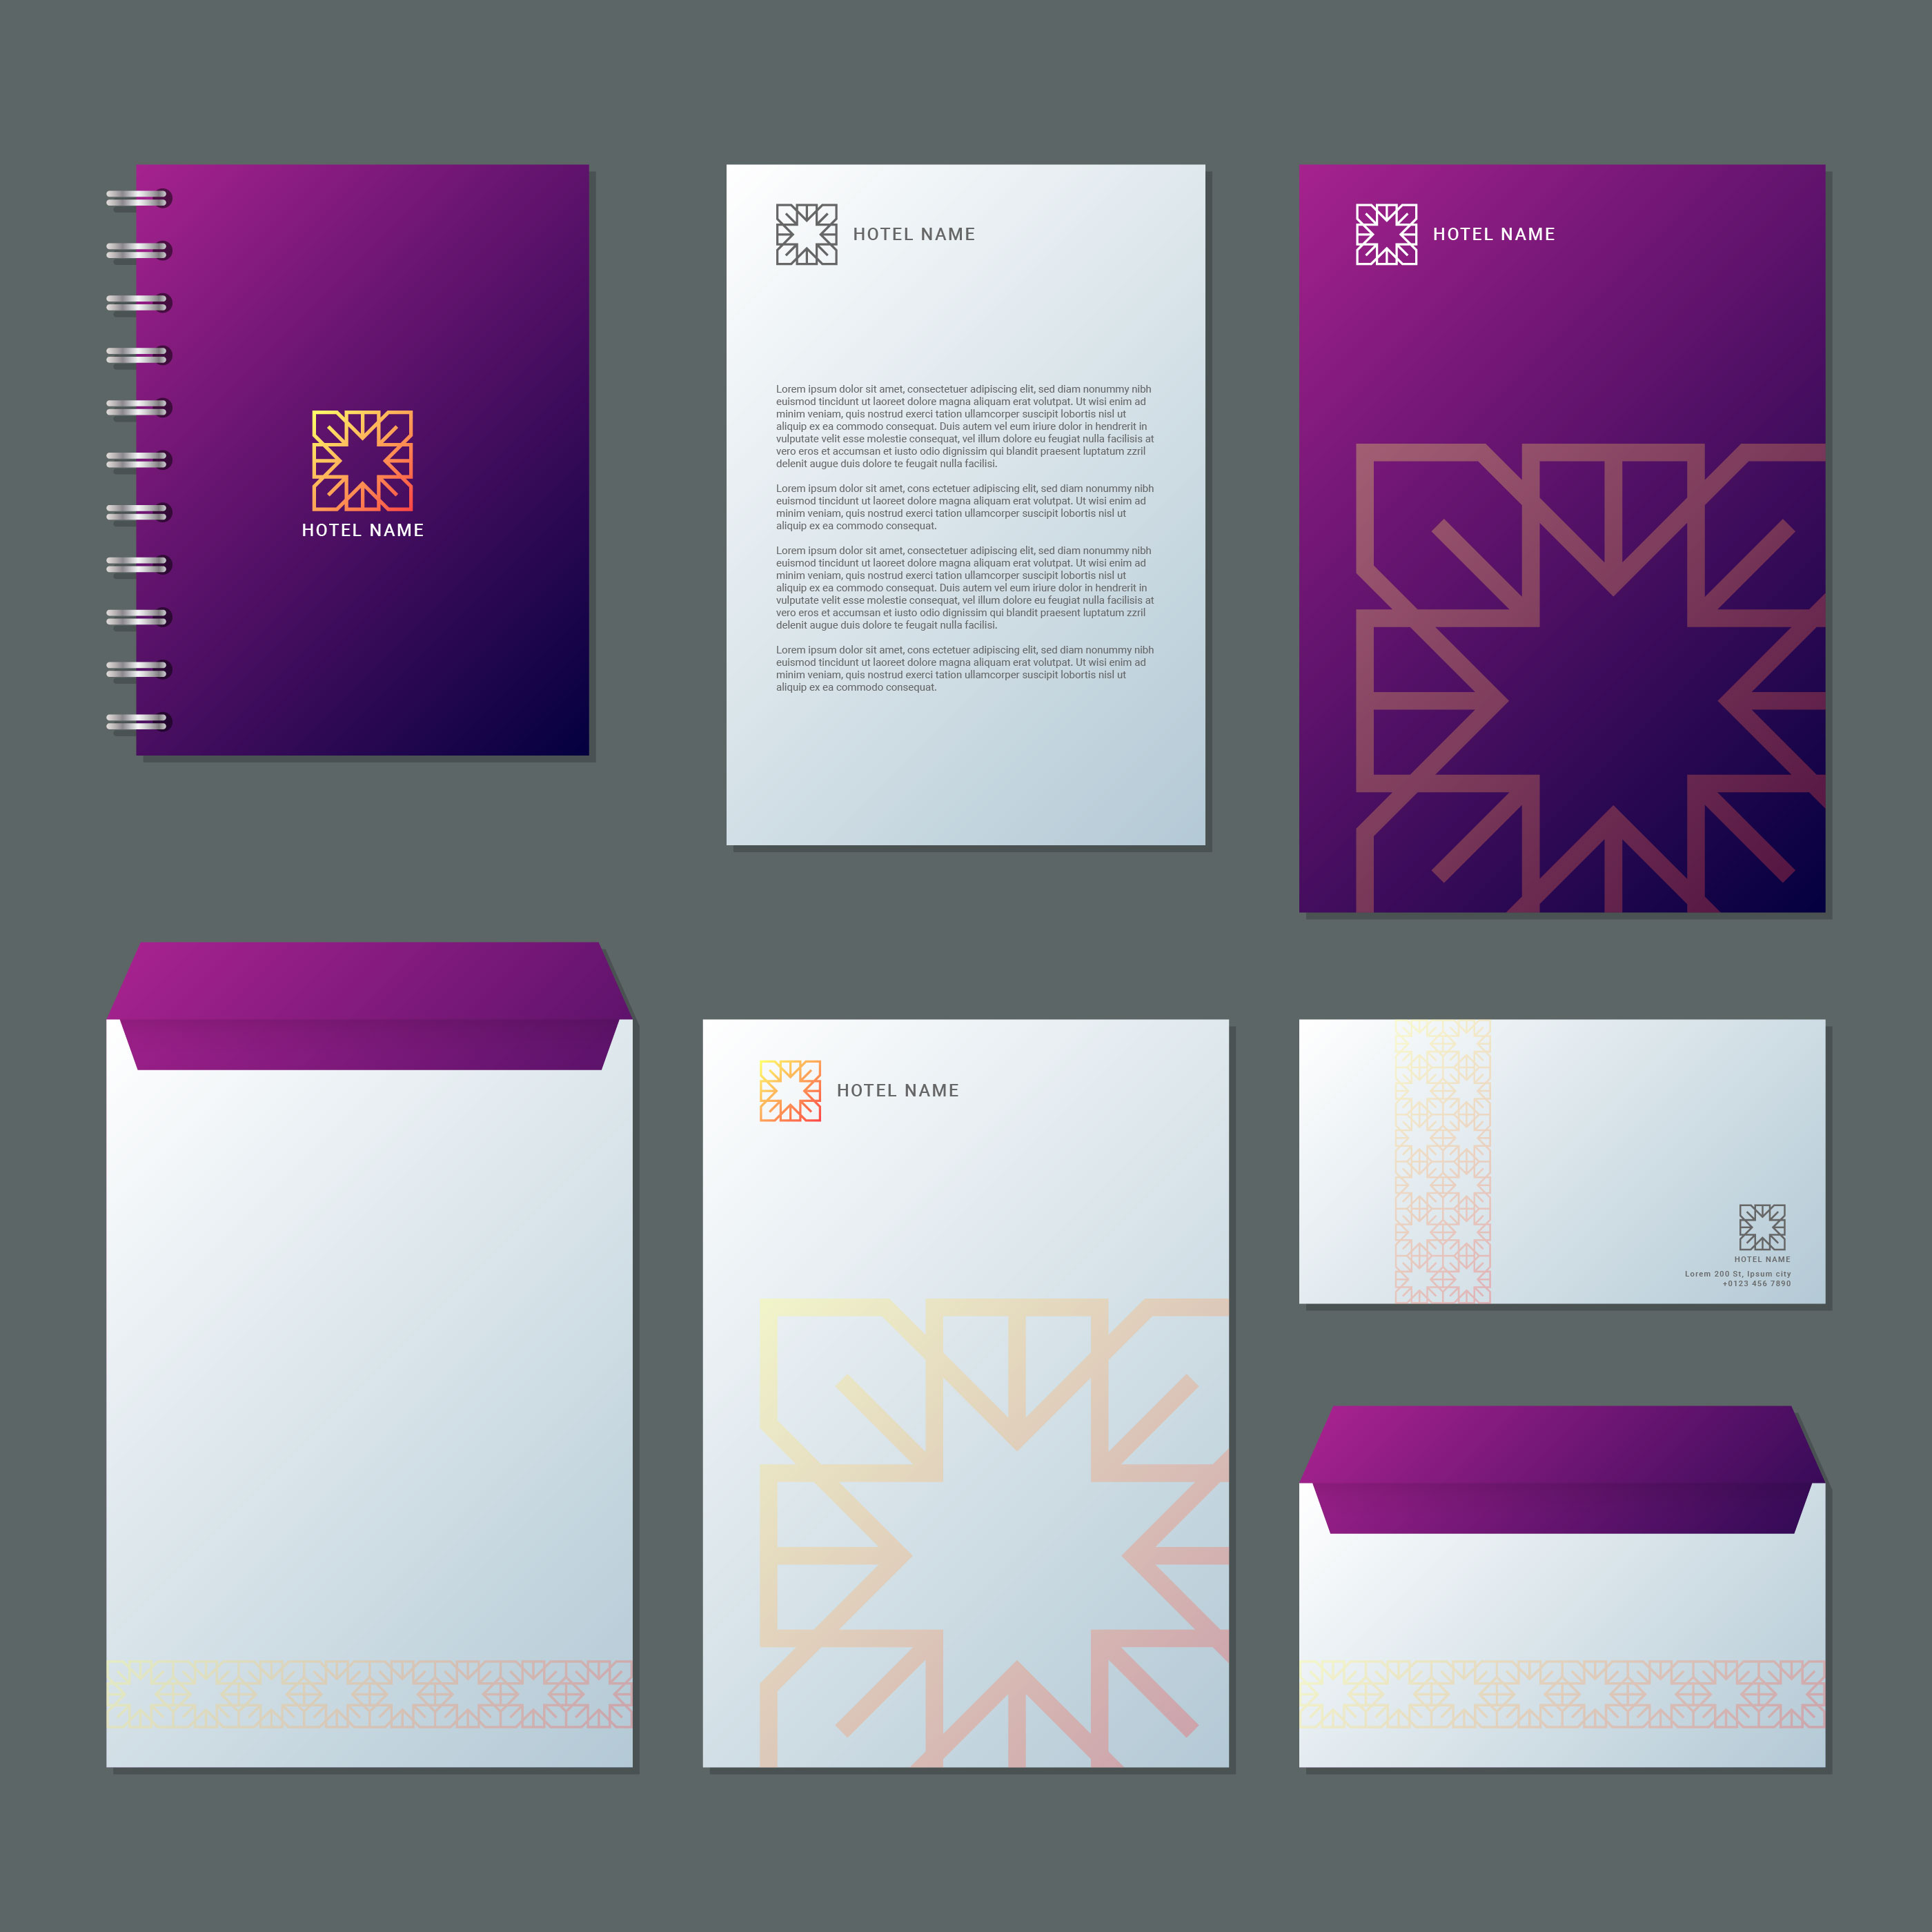 Download Business Hotel And Resort Spa Branding Identity Template Corporate Company Design Download Free Vectors Clipart Graphics Vector Art PSD Mockup Templates